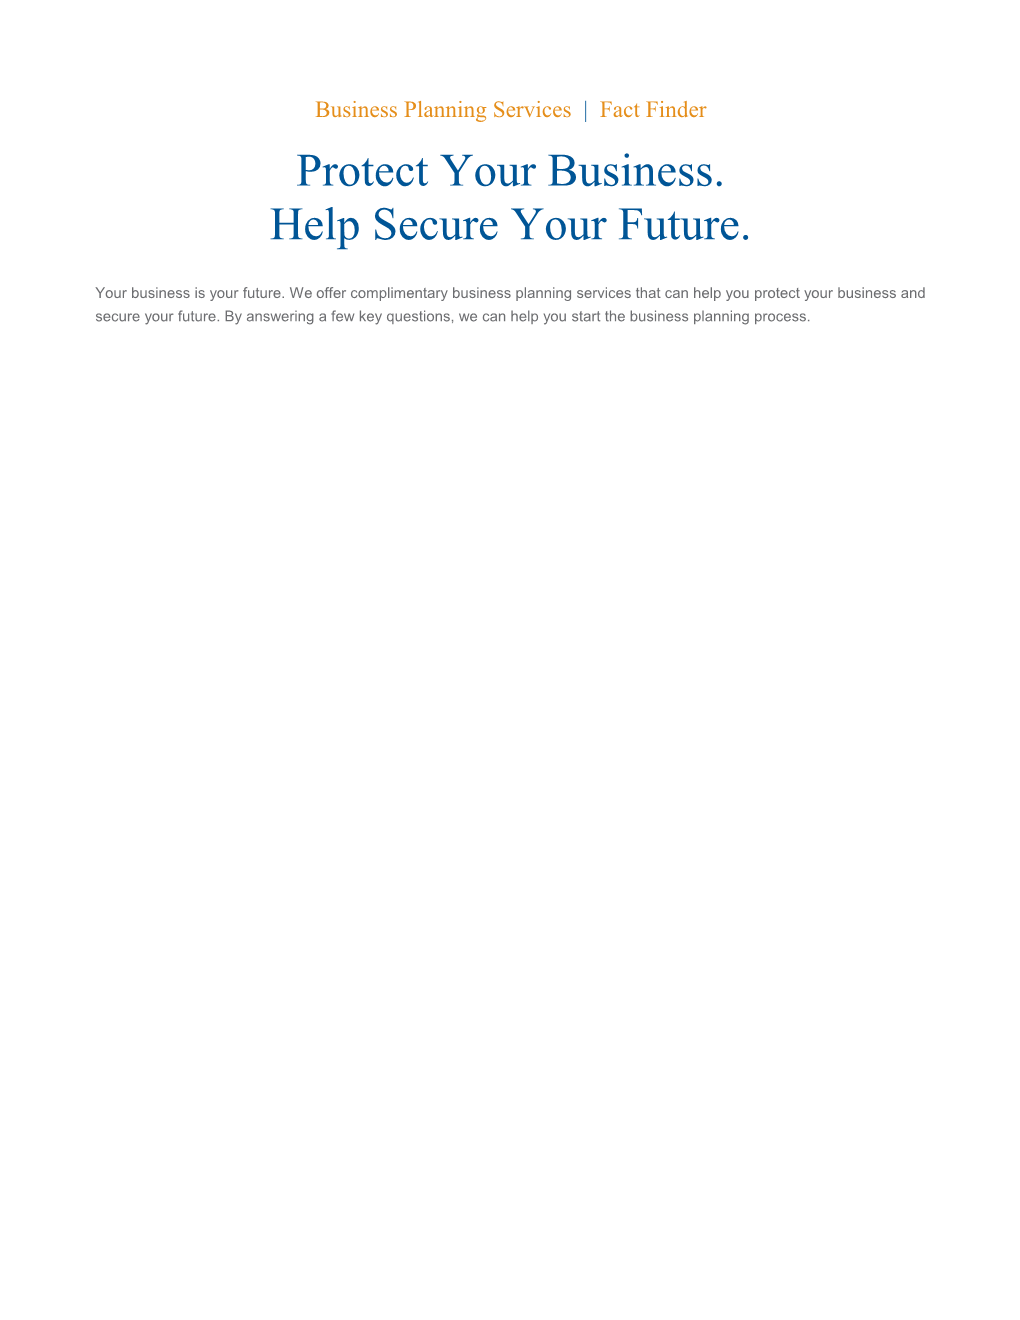 Business Planning Services Fact Finder